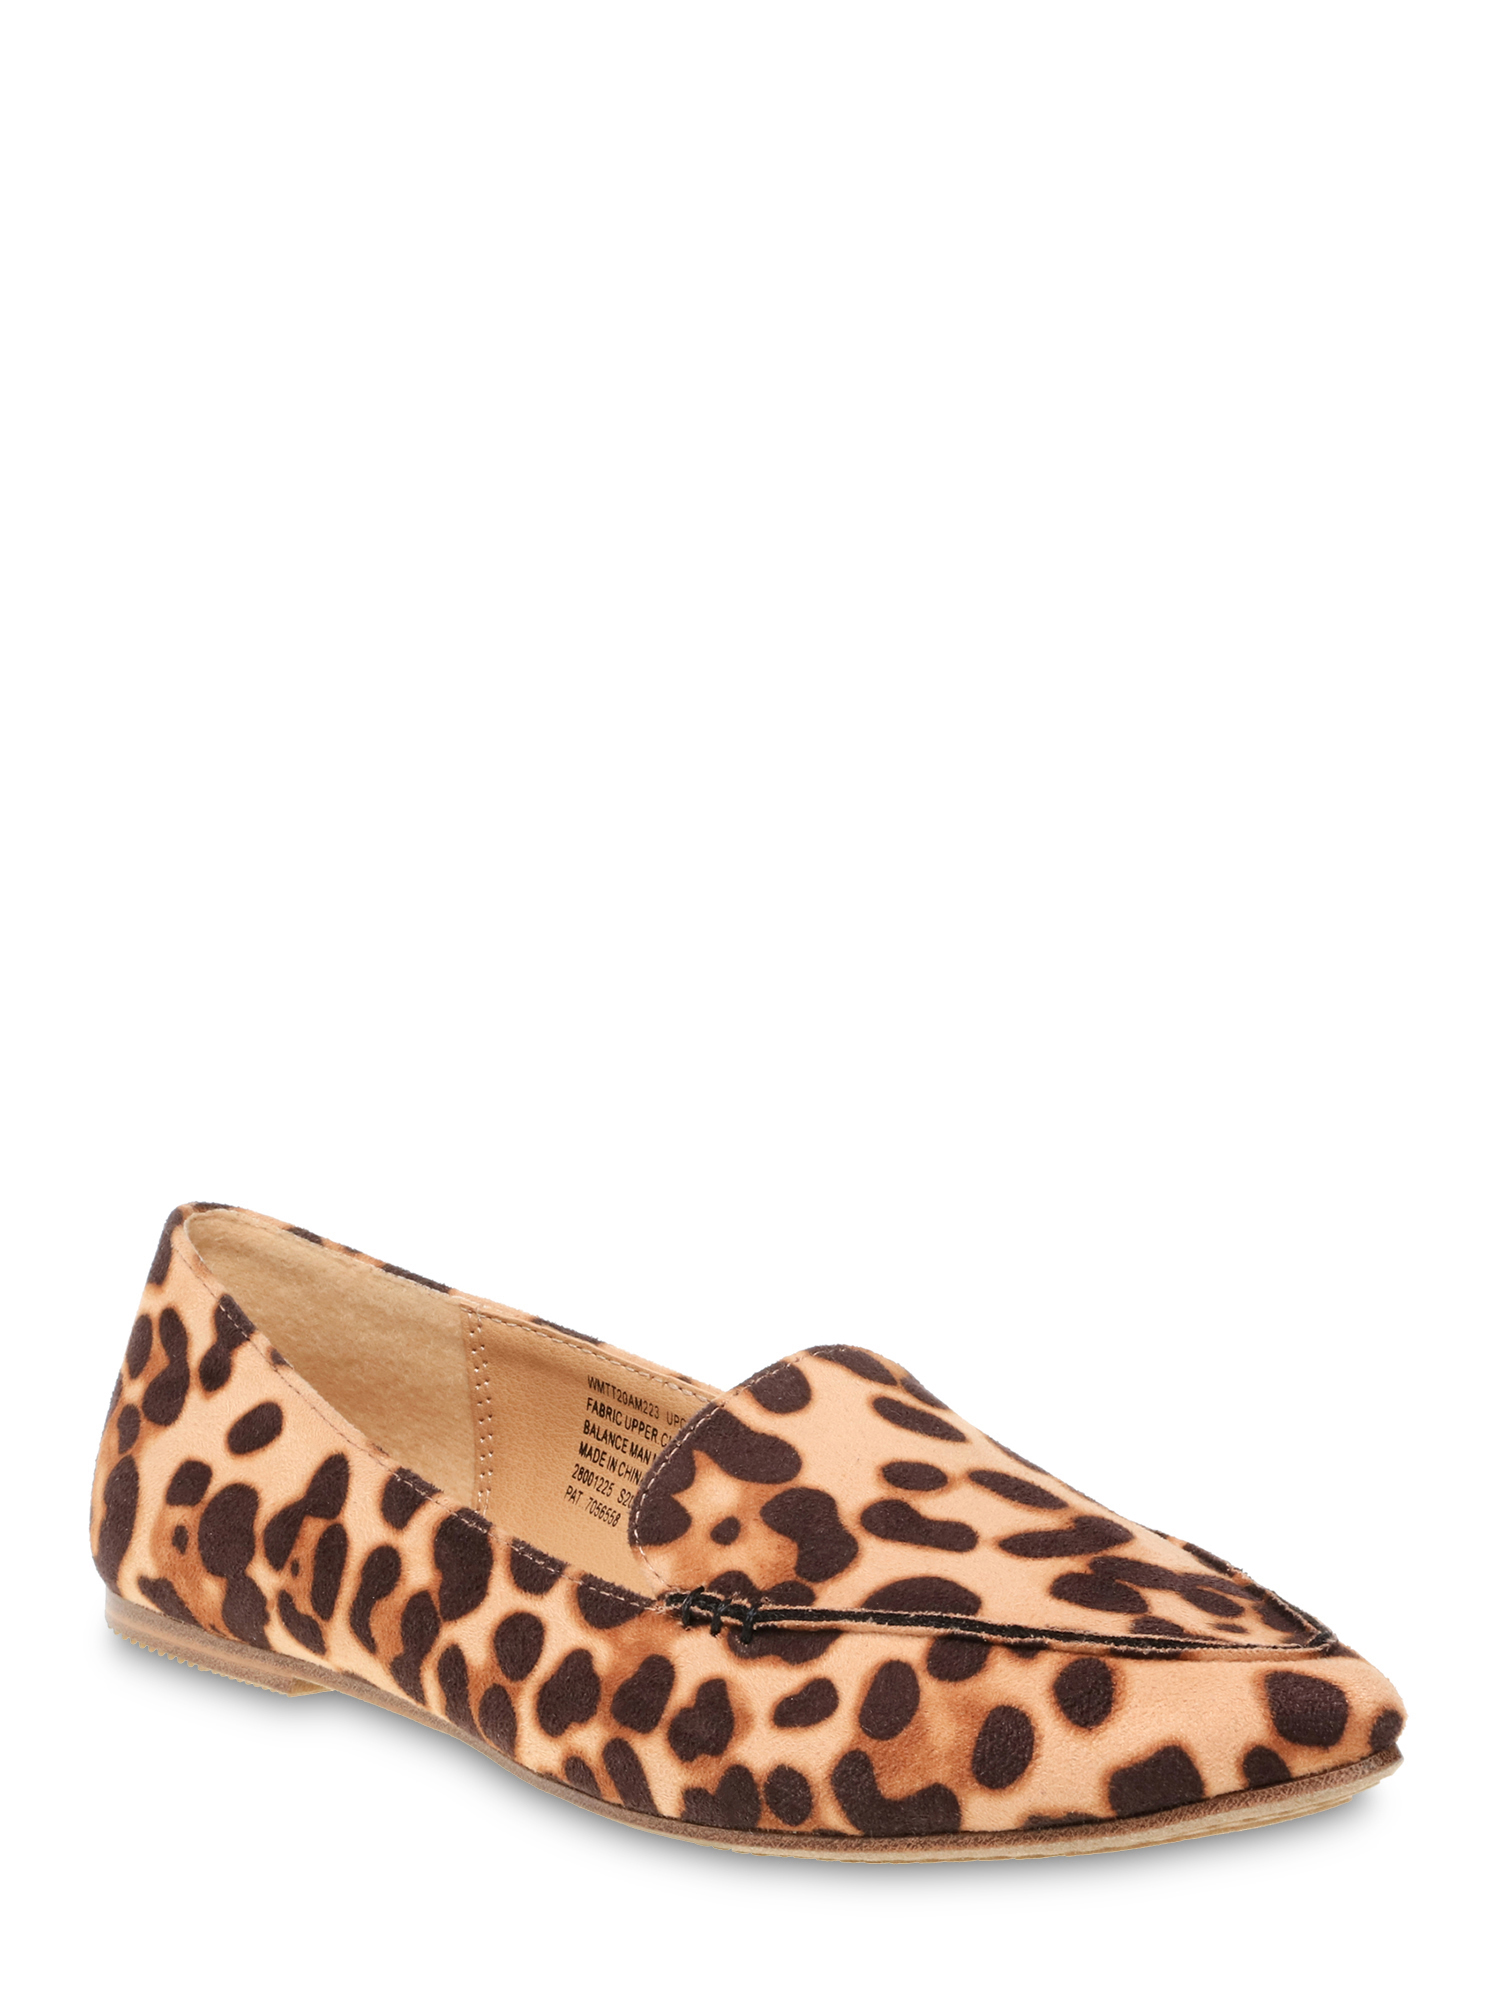 Women's Time and Tru Animal Print Feather Flat - image 1 of 6